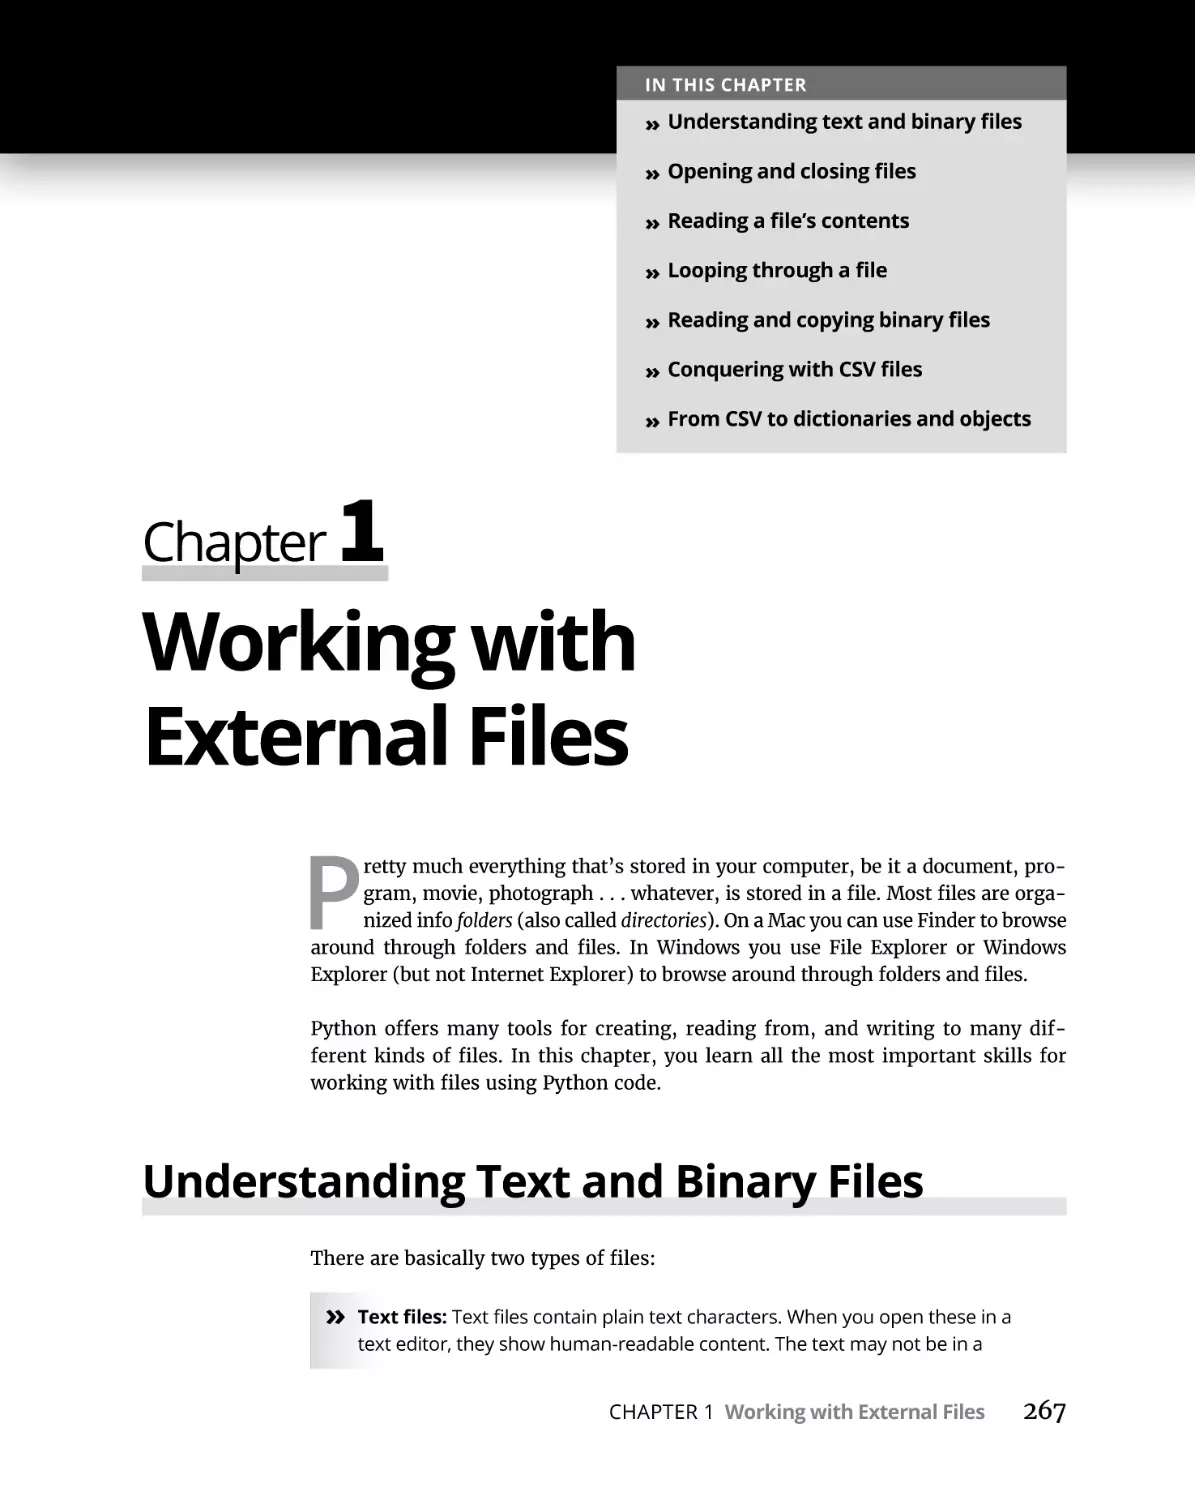 Chapter 1 Working with External Files
Understanding Text and Binary Files